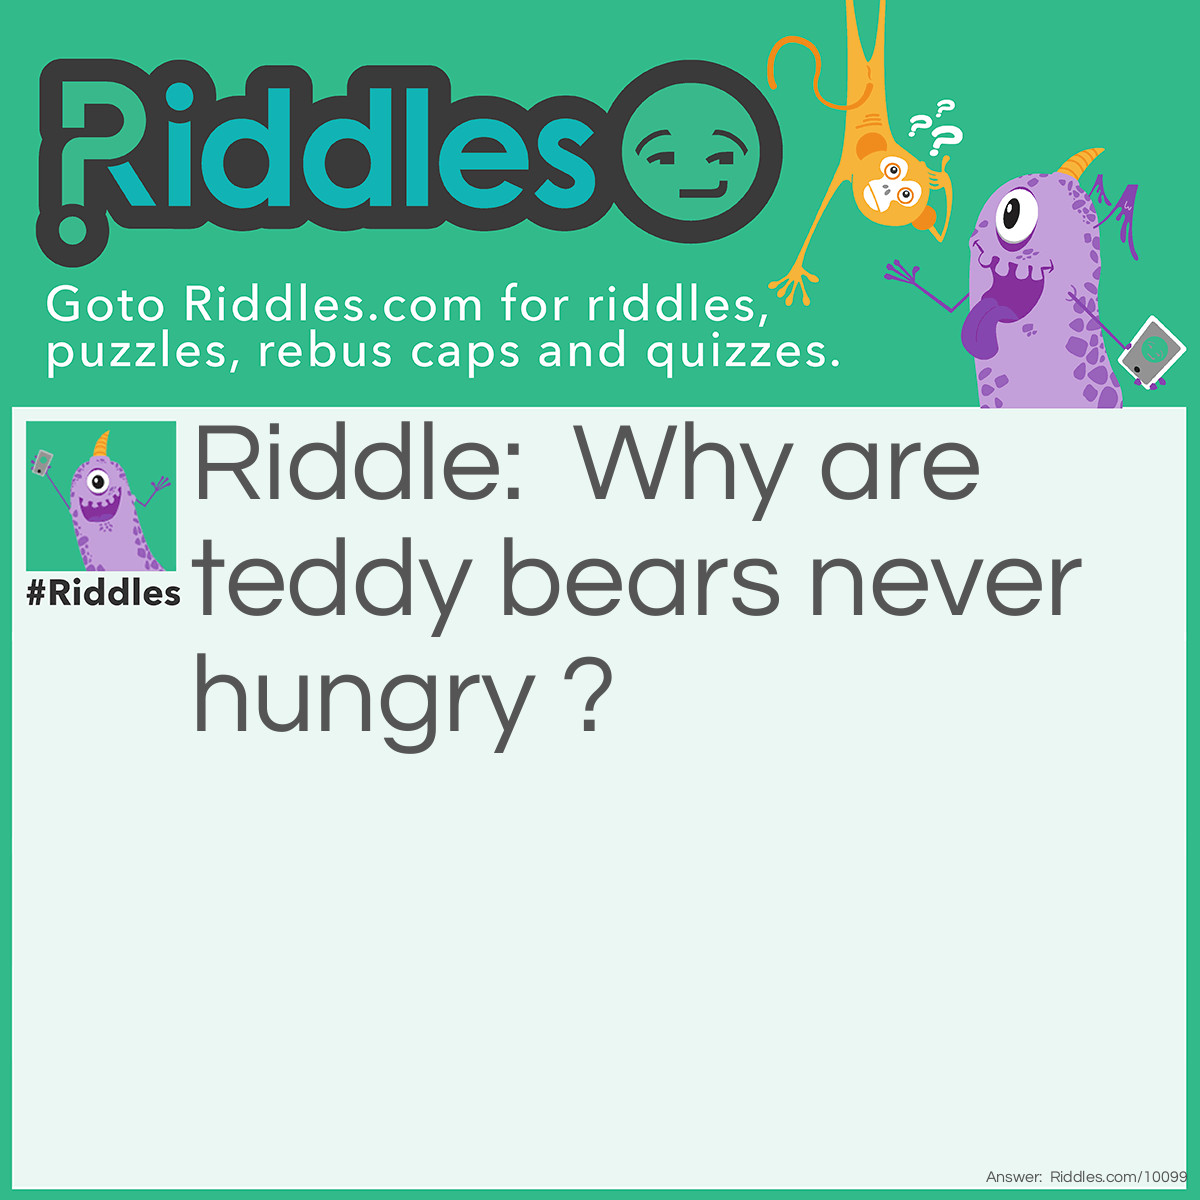 Riddle: Why are teddy bears never hungry ? Answer: Because they are always stuffed